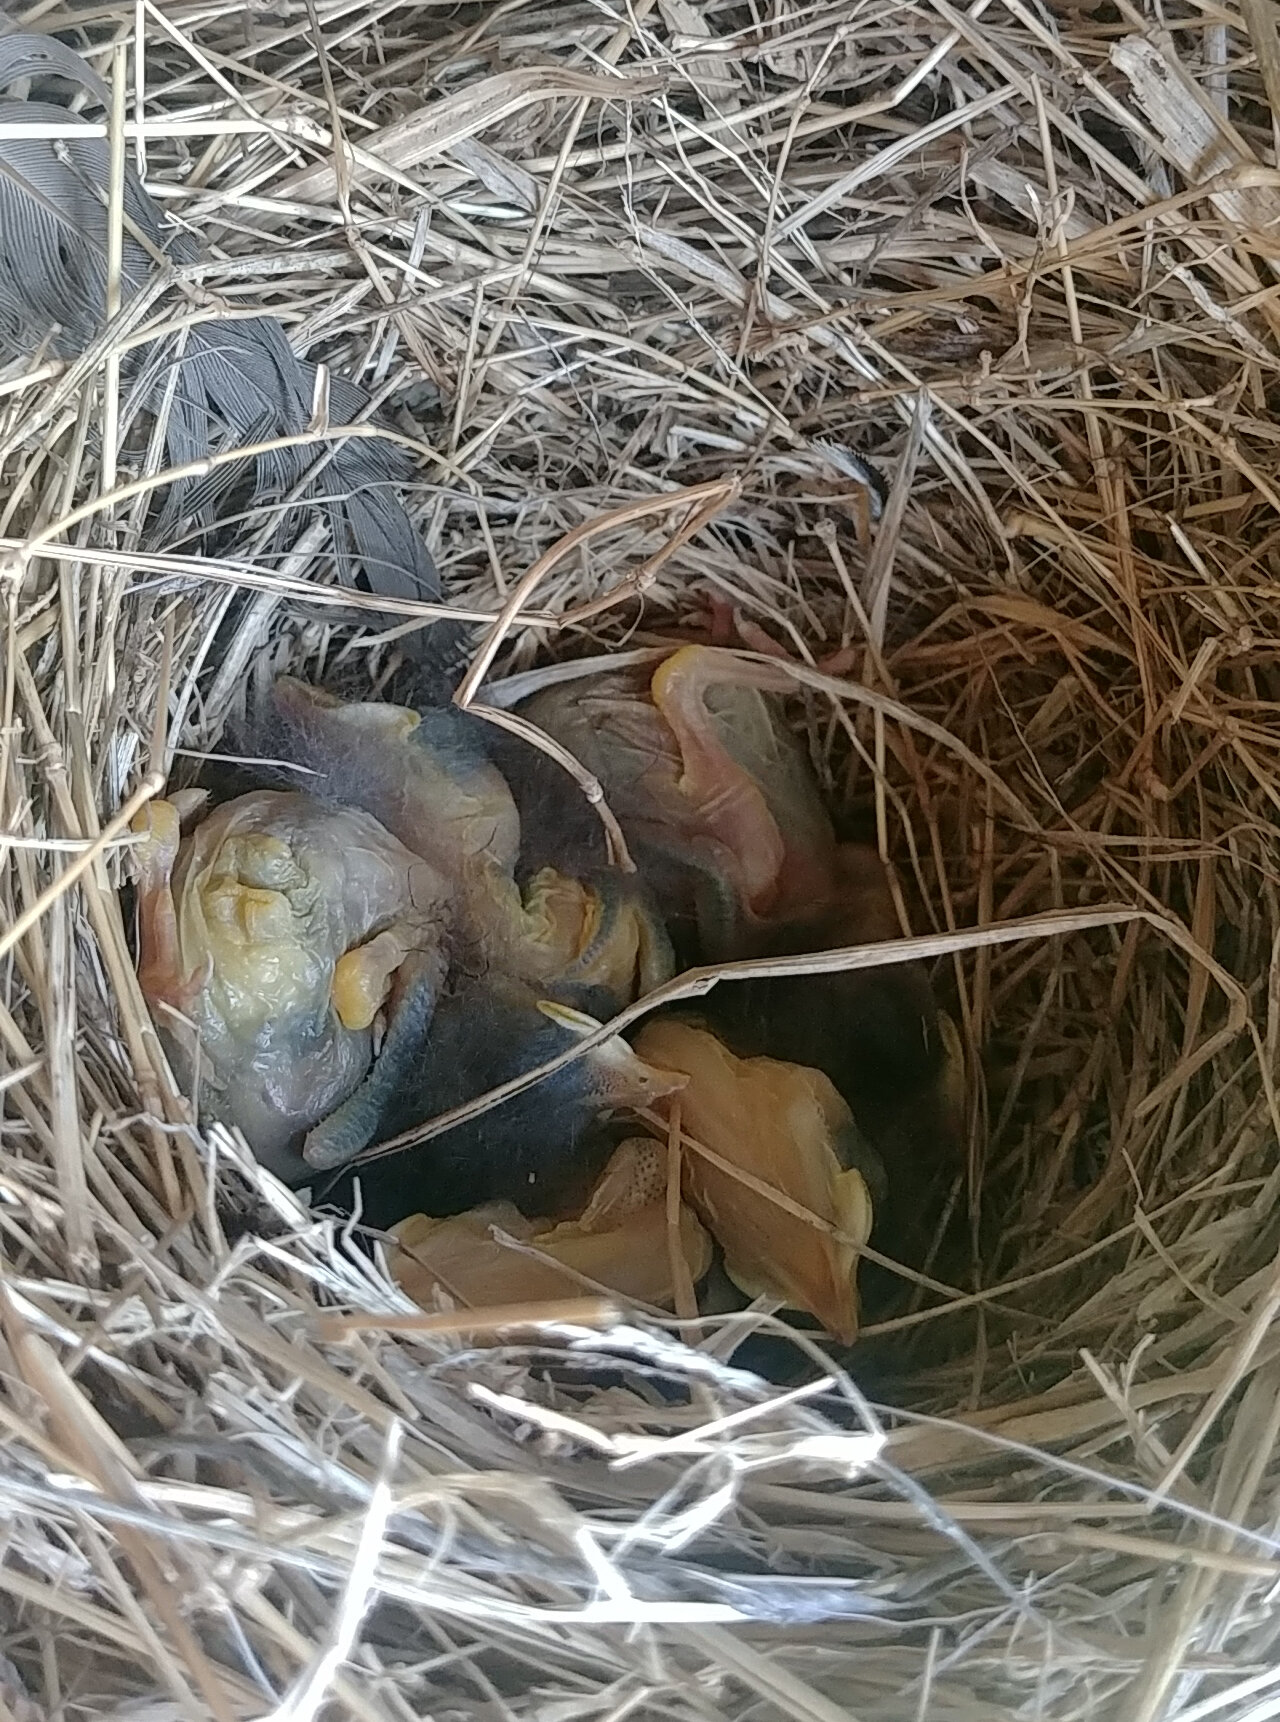  Newly hatched eastern bluebirds found in one of OSGF’s nesting boxes.  